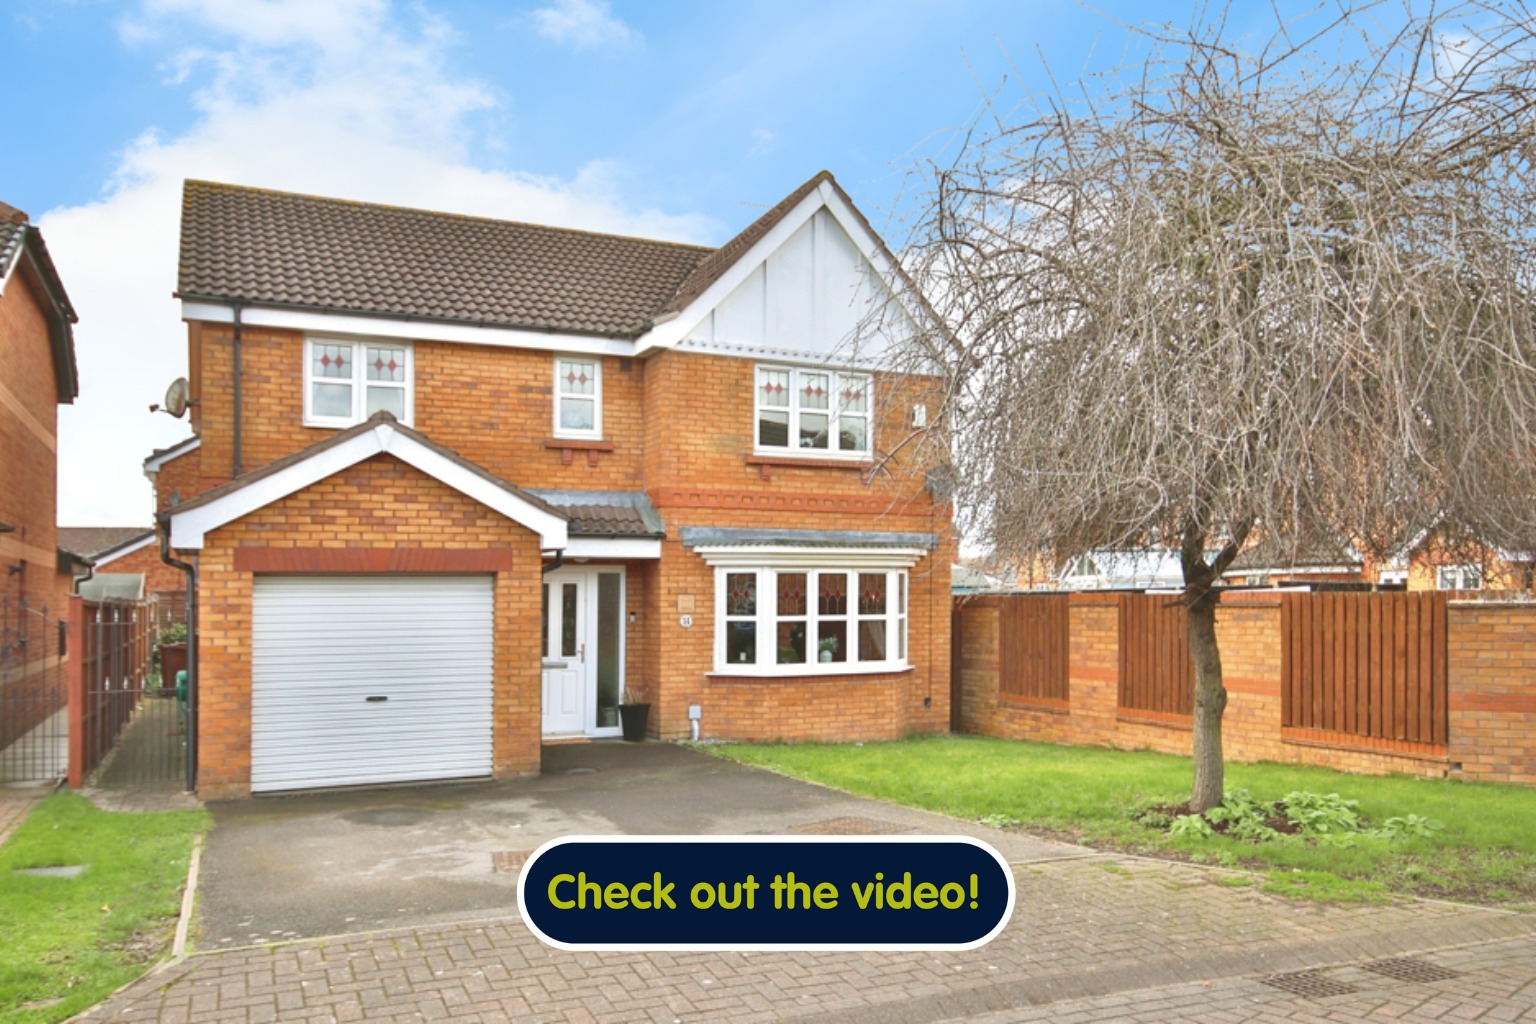 4 bed detached house for sale in Danbury Park, Hull - Property Image 1